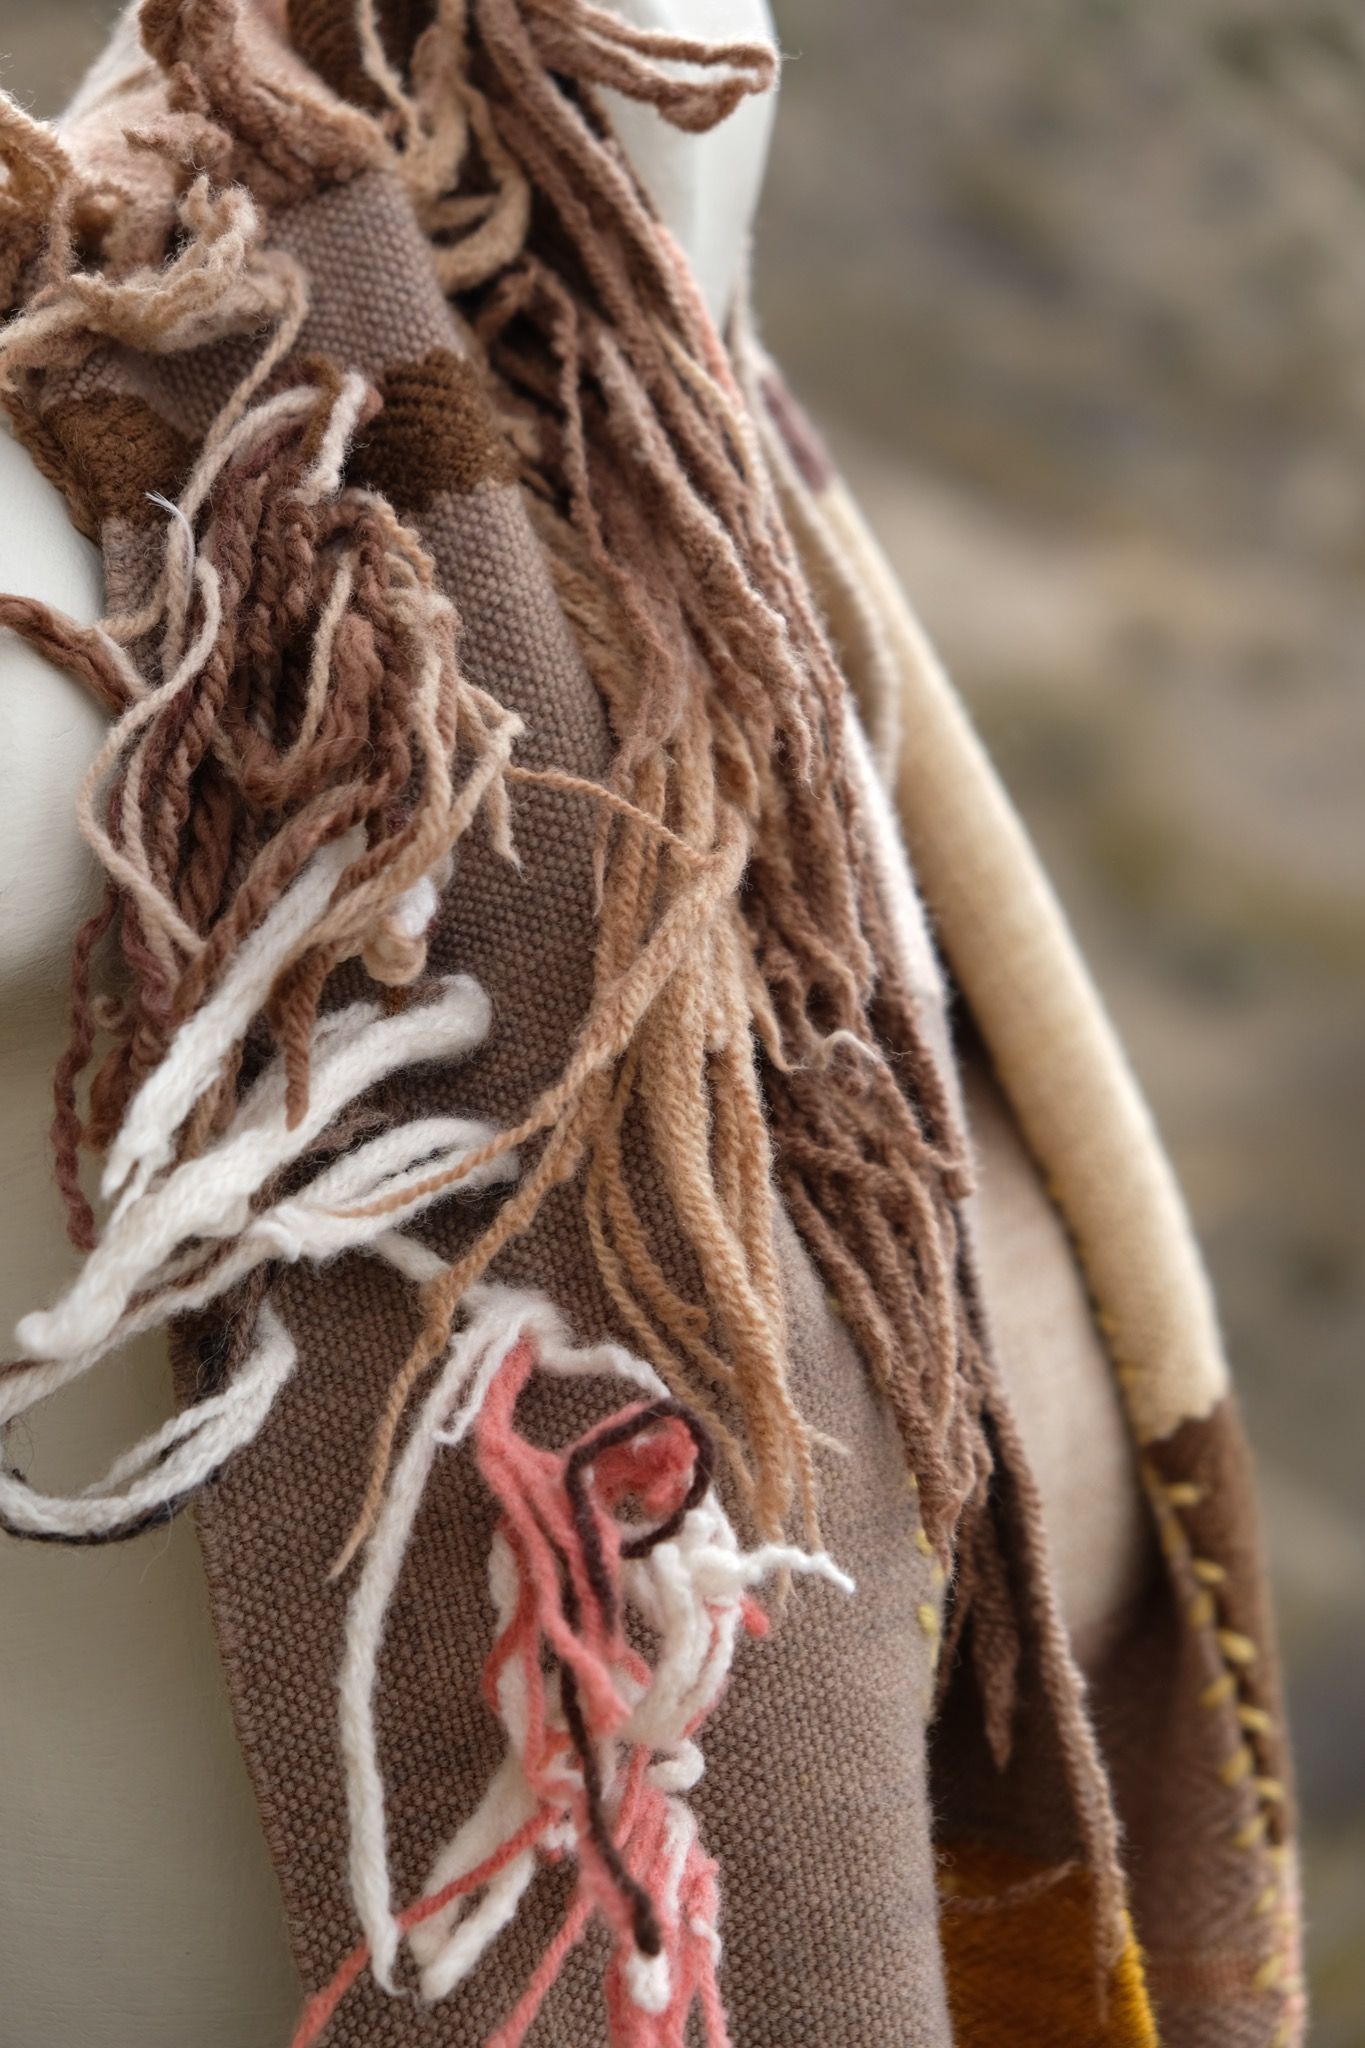 Detail of fringe on naturally dyed brown, yellow, pink, red and tan fringed infinity scarf on a white mannequin bust in the desert